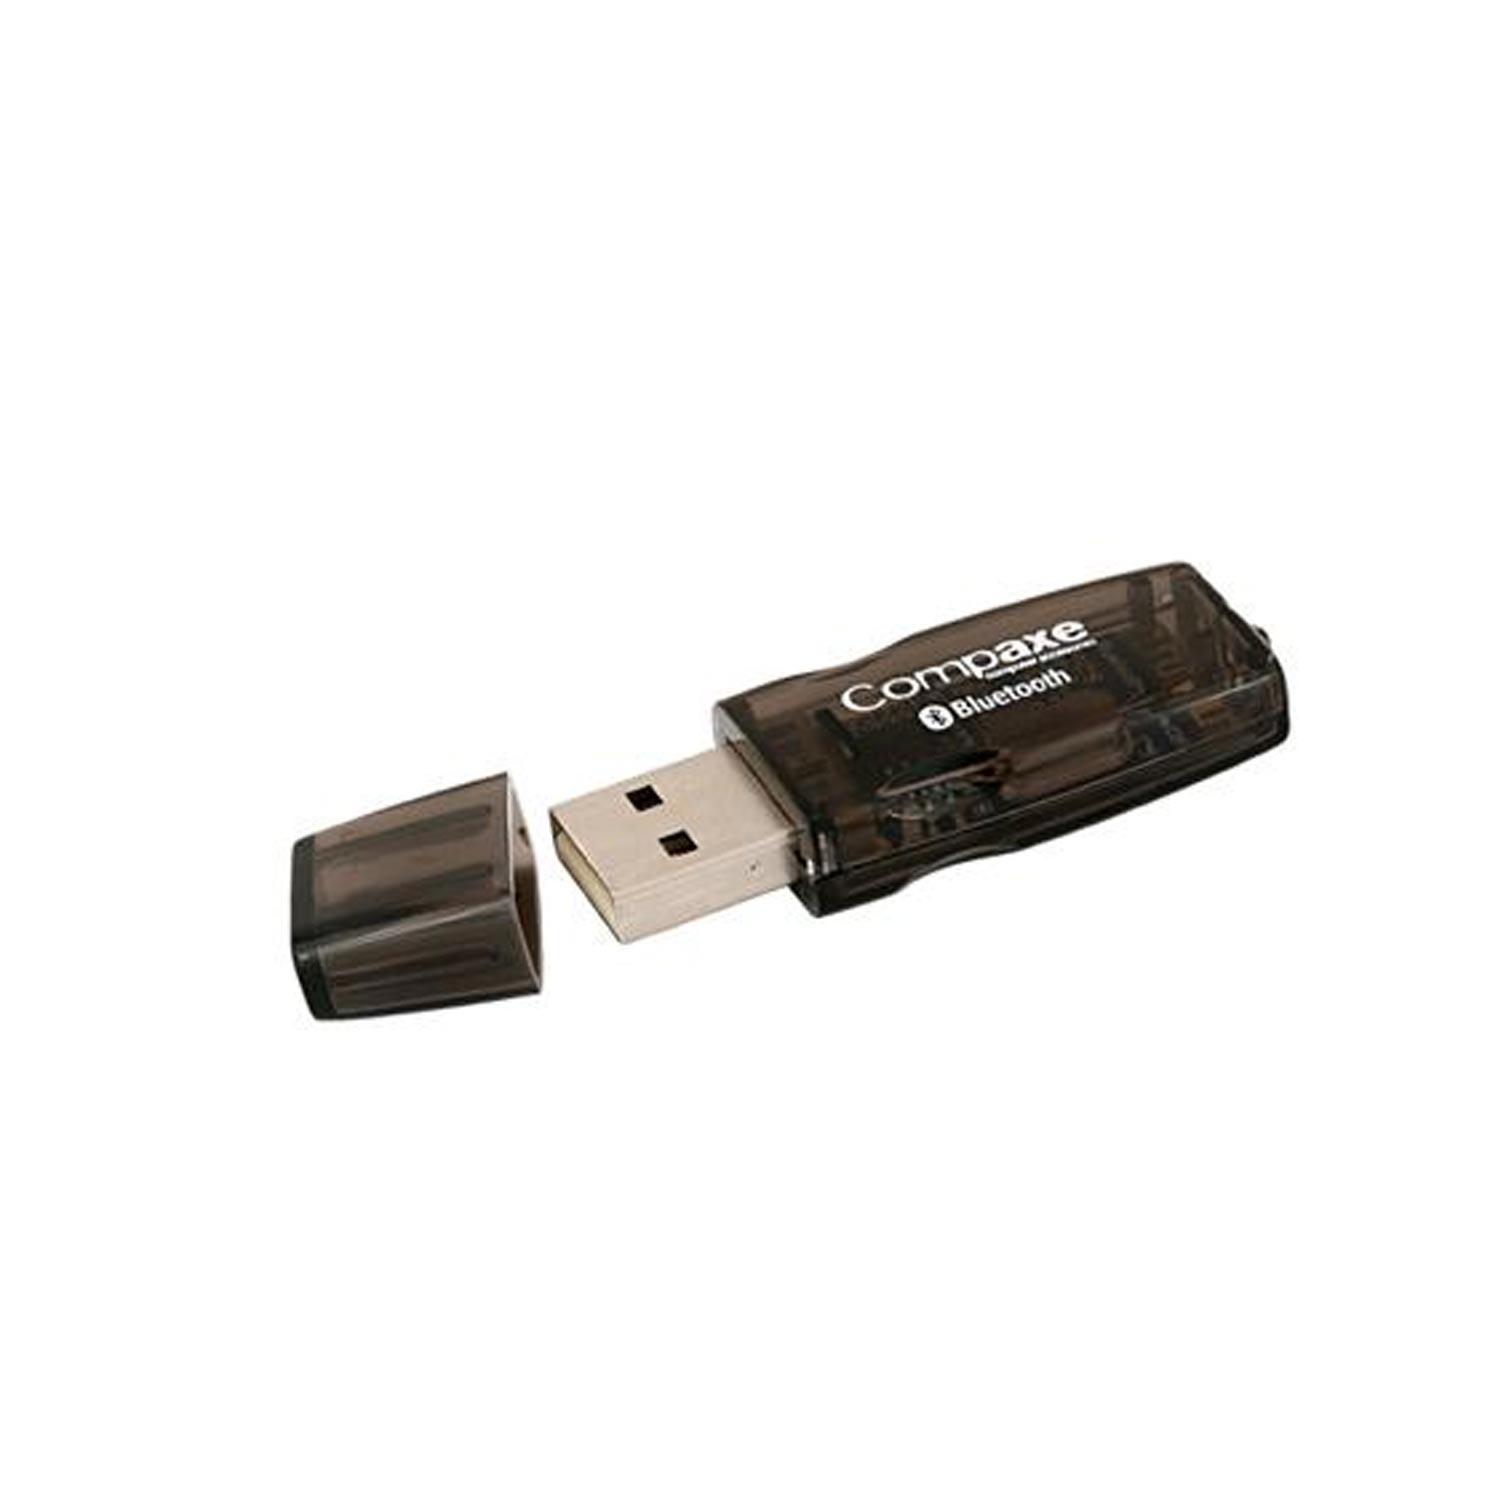 USB DONGLE BLUETOOTH 2.0 COMPAXE CM-BL200/BL100